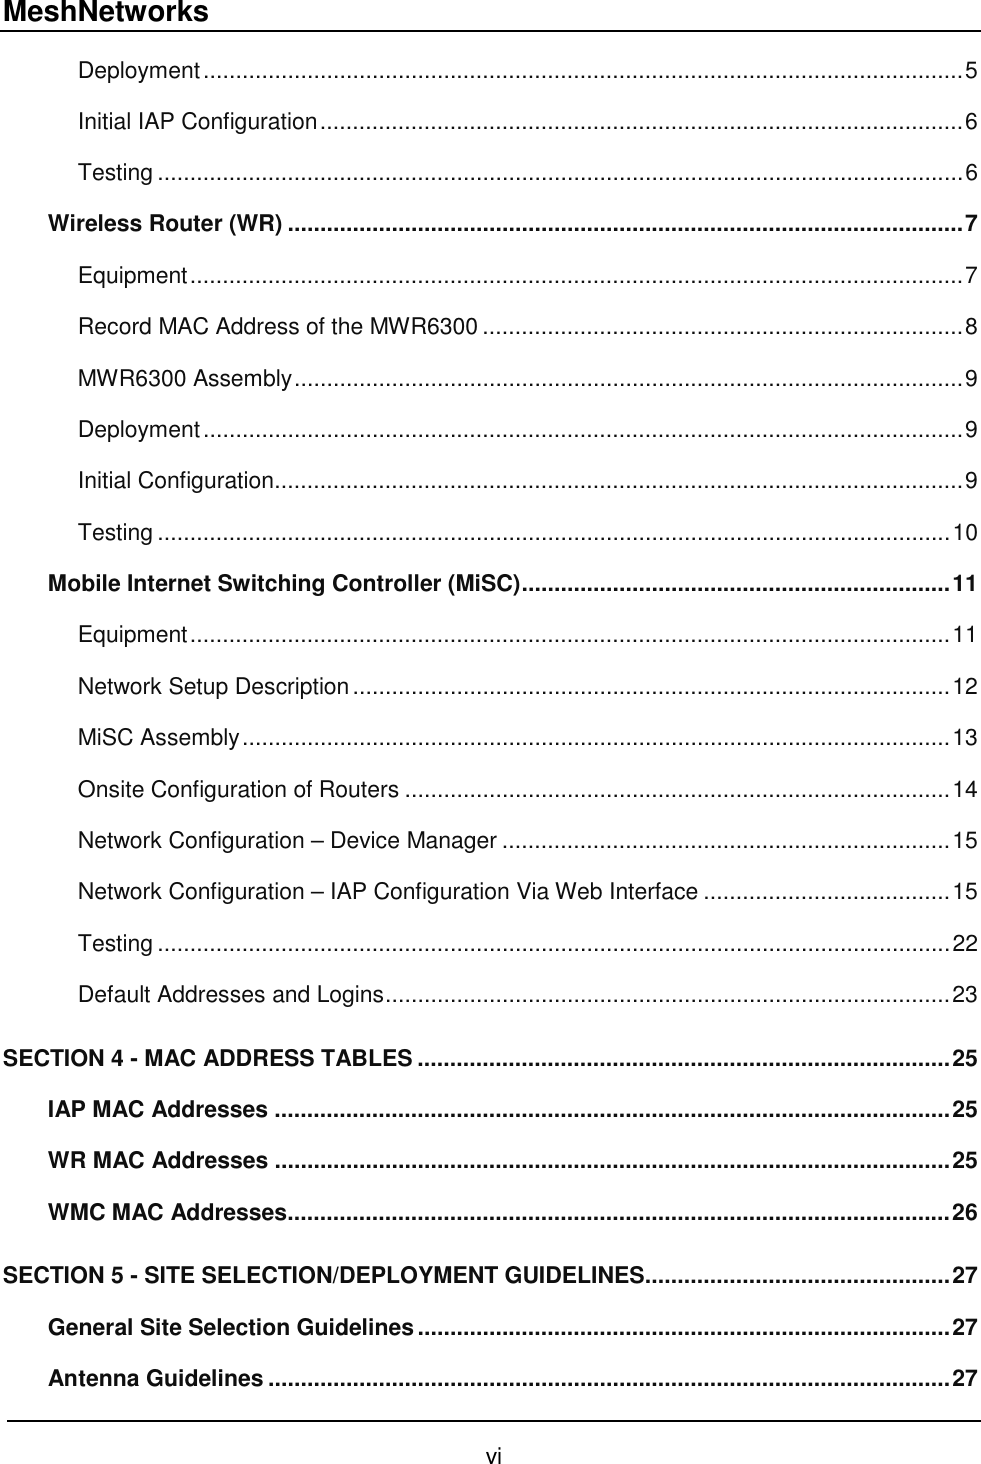 MeshNetworks vi Deployment.....................................................................................................................5 Initial IAP Configuration...................................................................................................6 Testing ............................................................................................................................6 Wireless Router (WR) ........................................................................................................7 Equipment.......................................................................................................................7 Record MAC Address of the MWR6300 ..........................................................................8 MWR6300 Assembly.......................................................................................................9 Deployment.....................................................................................................................9 Initial Configuration..........................................................................................................9 Testing ..........................................................................................................................10 Mobile Internet Switching Controller (MiSC)..................................................................11 Equipment.....................................................................................................................11 Network Setup Description............................................................................................12 MiSC Assembly.............................................................................................................13 Onsite Configuration of Routers ....................................................................................14 Network Configuration – Device Manager .....................................................................15 Network Configuration – IAP Configuration Via Web Interface ......................................15 Testing ..........................................................................................................................22 Default Addresses and Logins.......................................................................................23 SECTION 4 - MAC ADDRESS TABLES ..................................................................................25 IAP MAC Addresses ........................................................................................................25 WR MAC Addresses ........................................................................................................25 WMC MAC Addresses......................................................................................................26 SECTION 5 - SITE SELECTION/DEPLOYMENT GUIDELINES...............................................27 General Site Selection Guidelines..................................................................................27 Antenna Guidelines .........................................................................................................27 